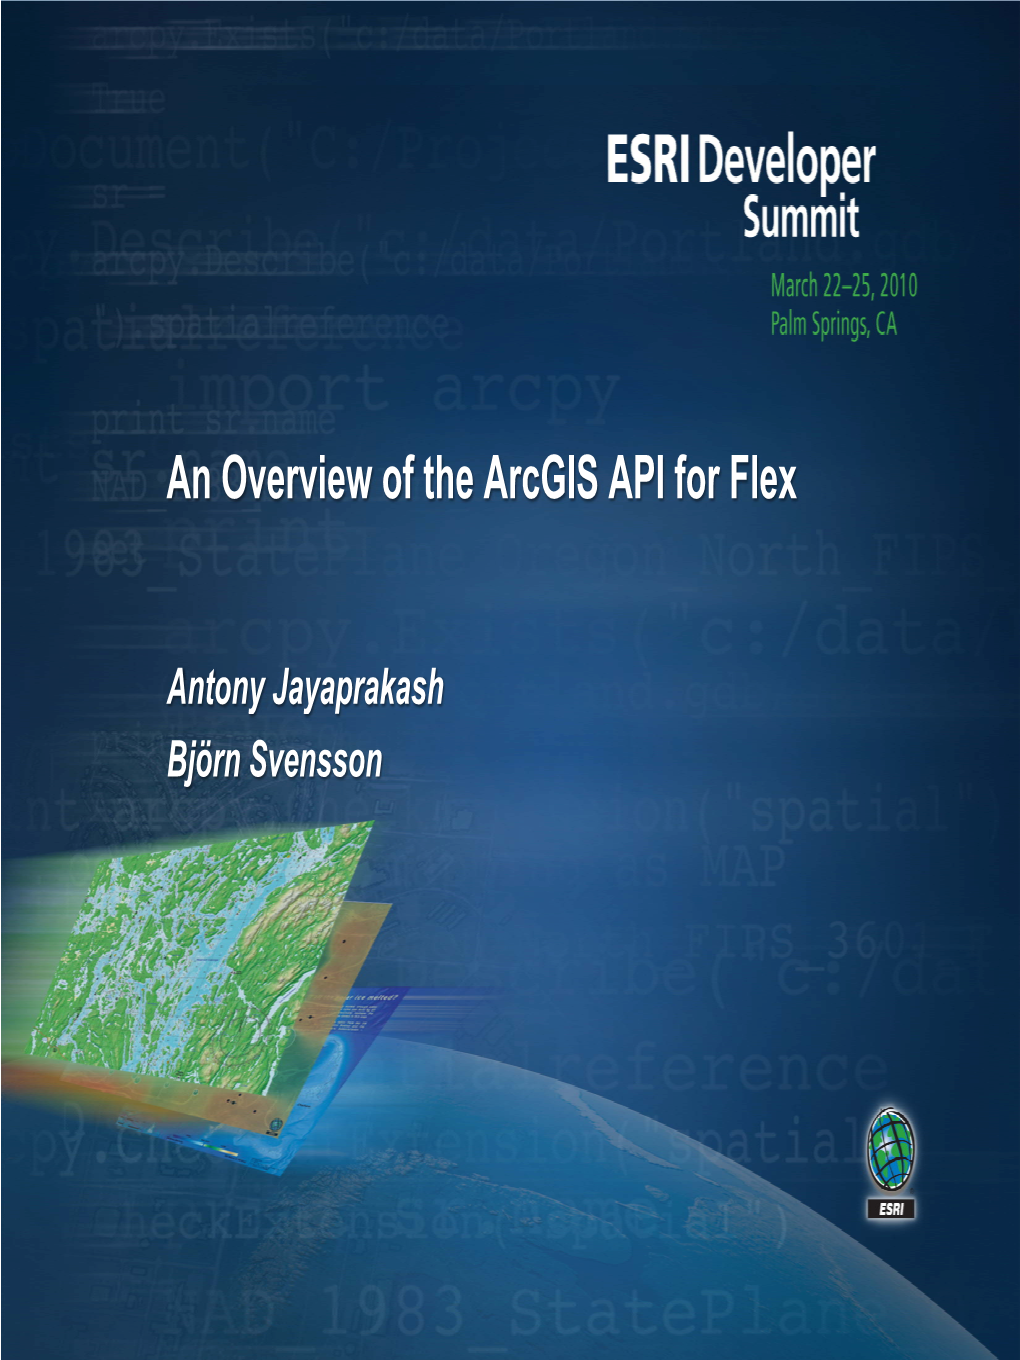 An Overview of the Arcgis API for Flex